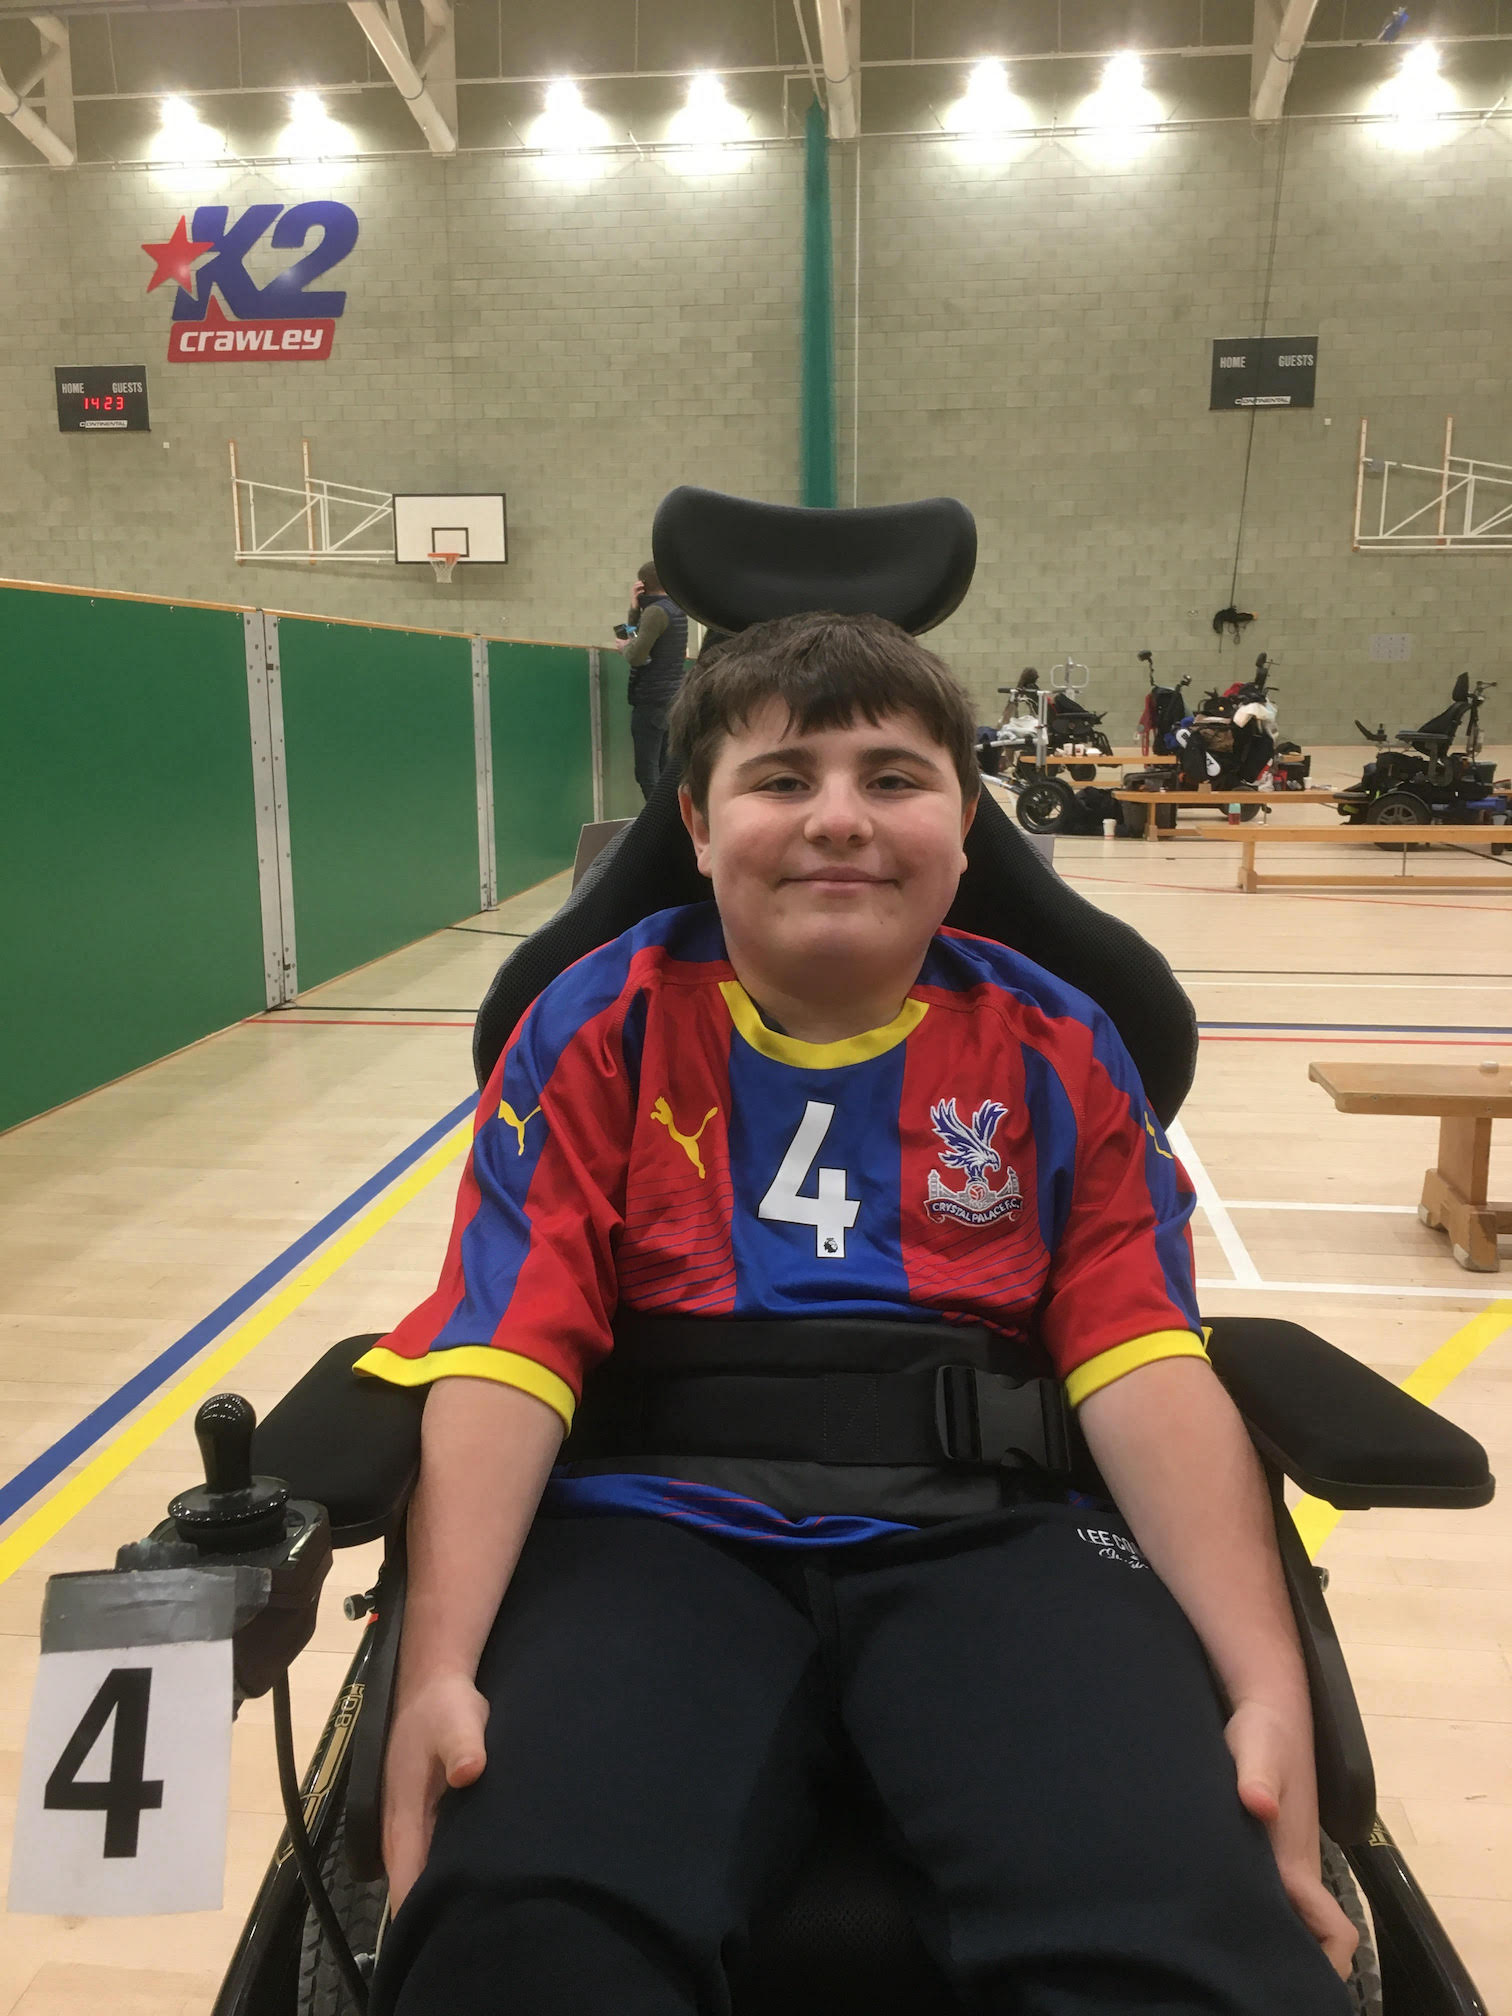 Stanley age 10 playing powerchair football